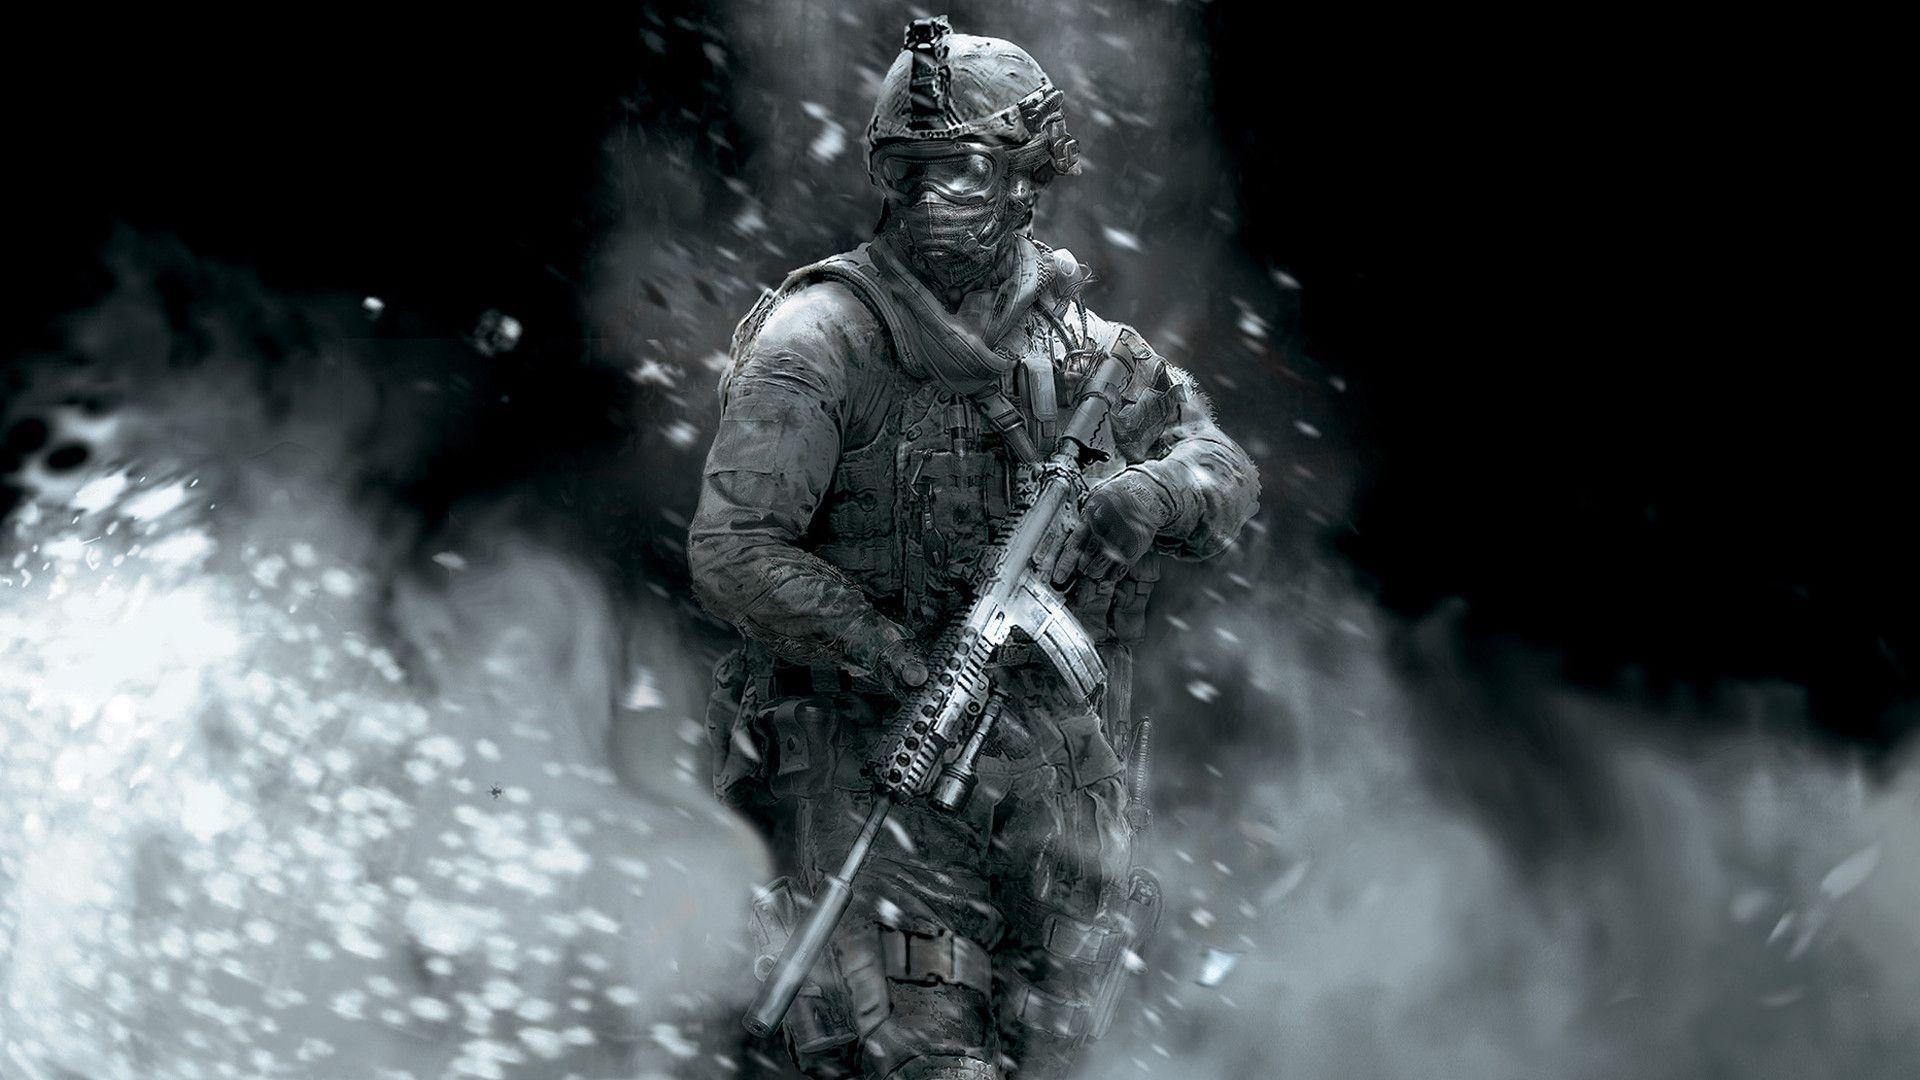 mw2 wallpaper - Image And Wallpaper free to download